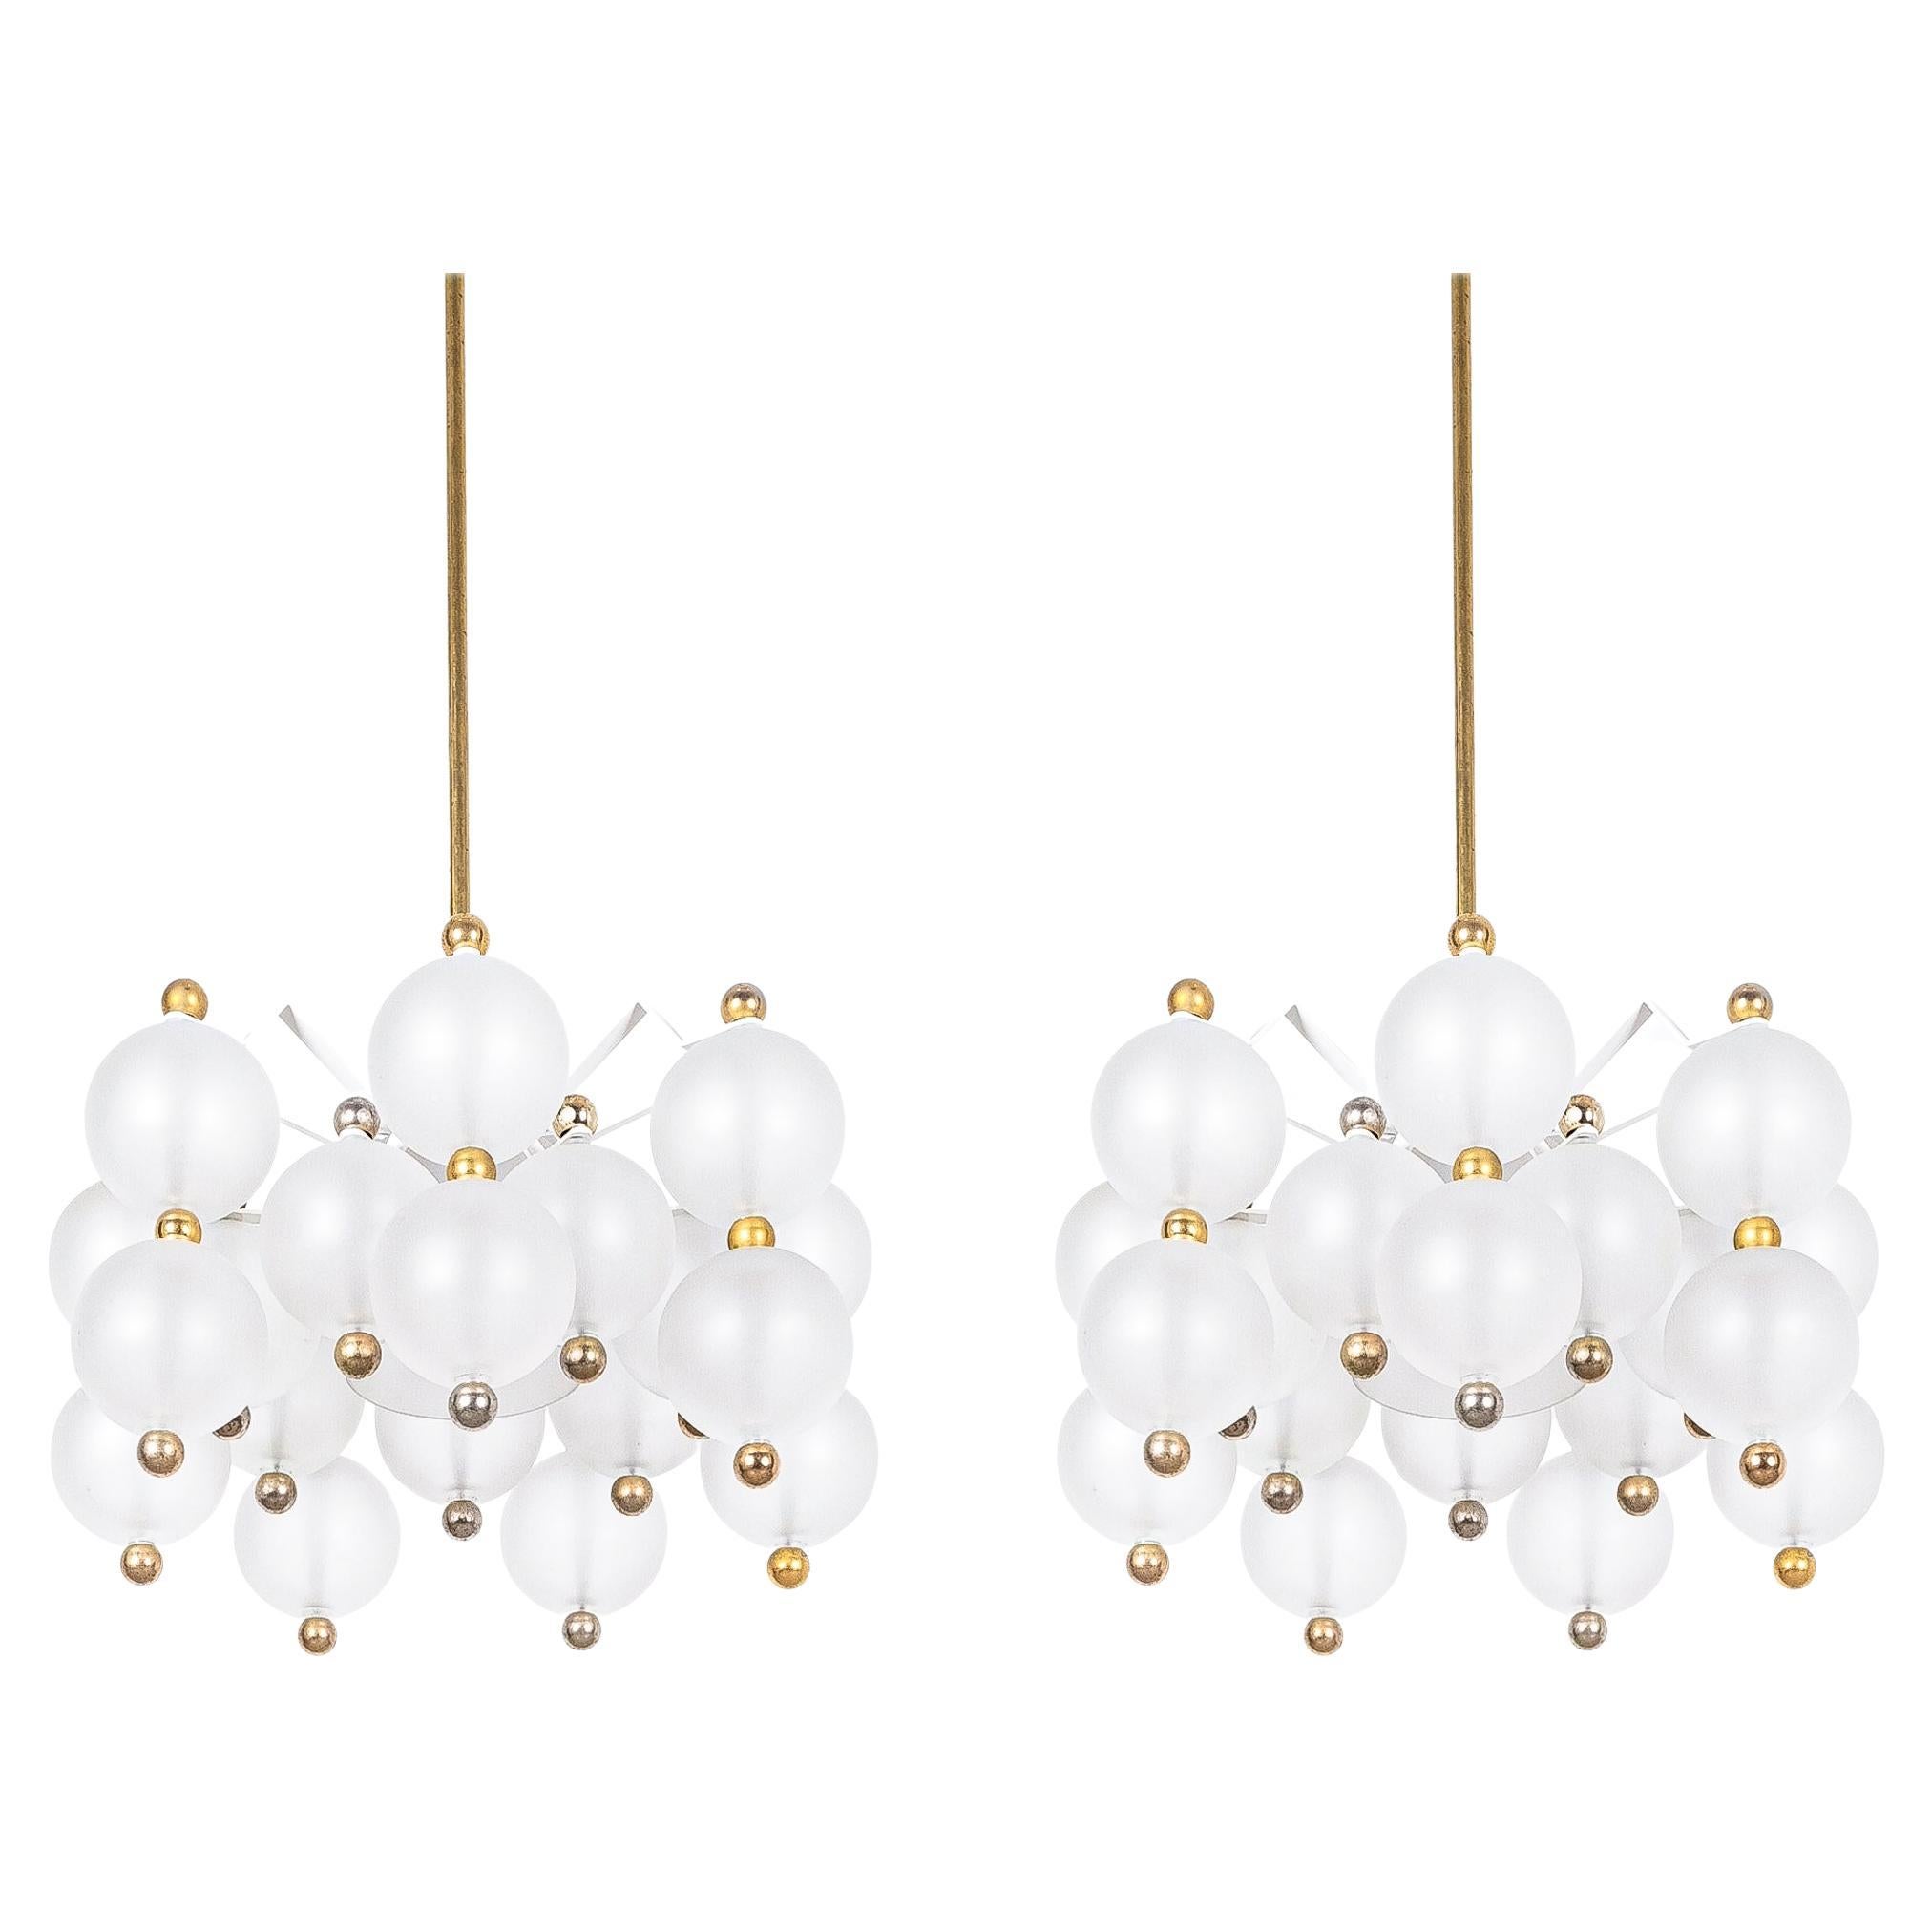 Satin Glass Chandeliers '2' by Kinkeldey with Gold Knobs, circa 1970 For Sale